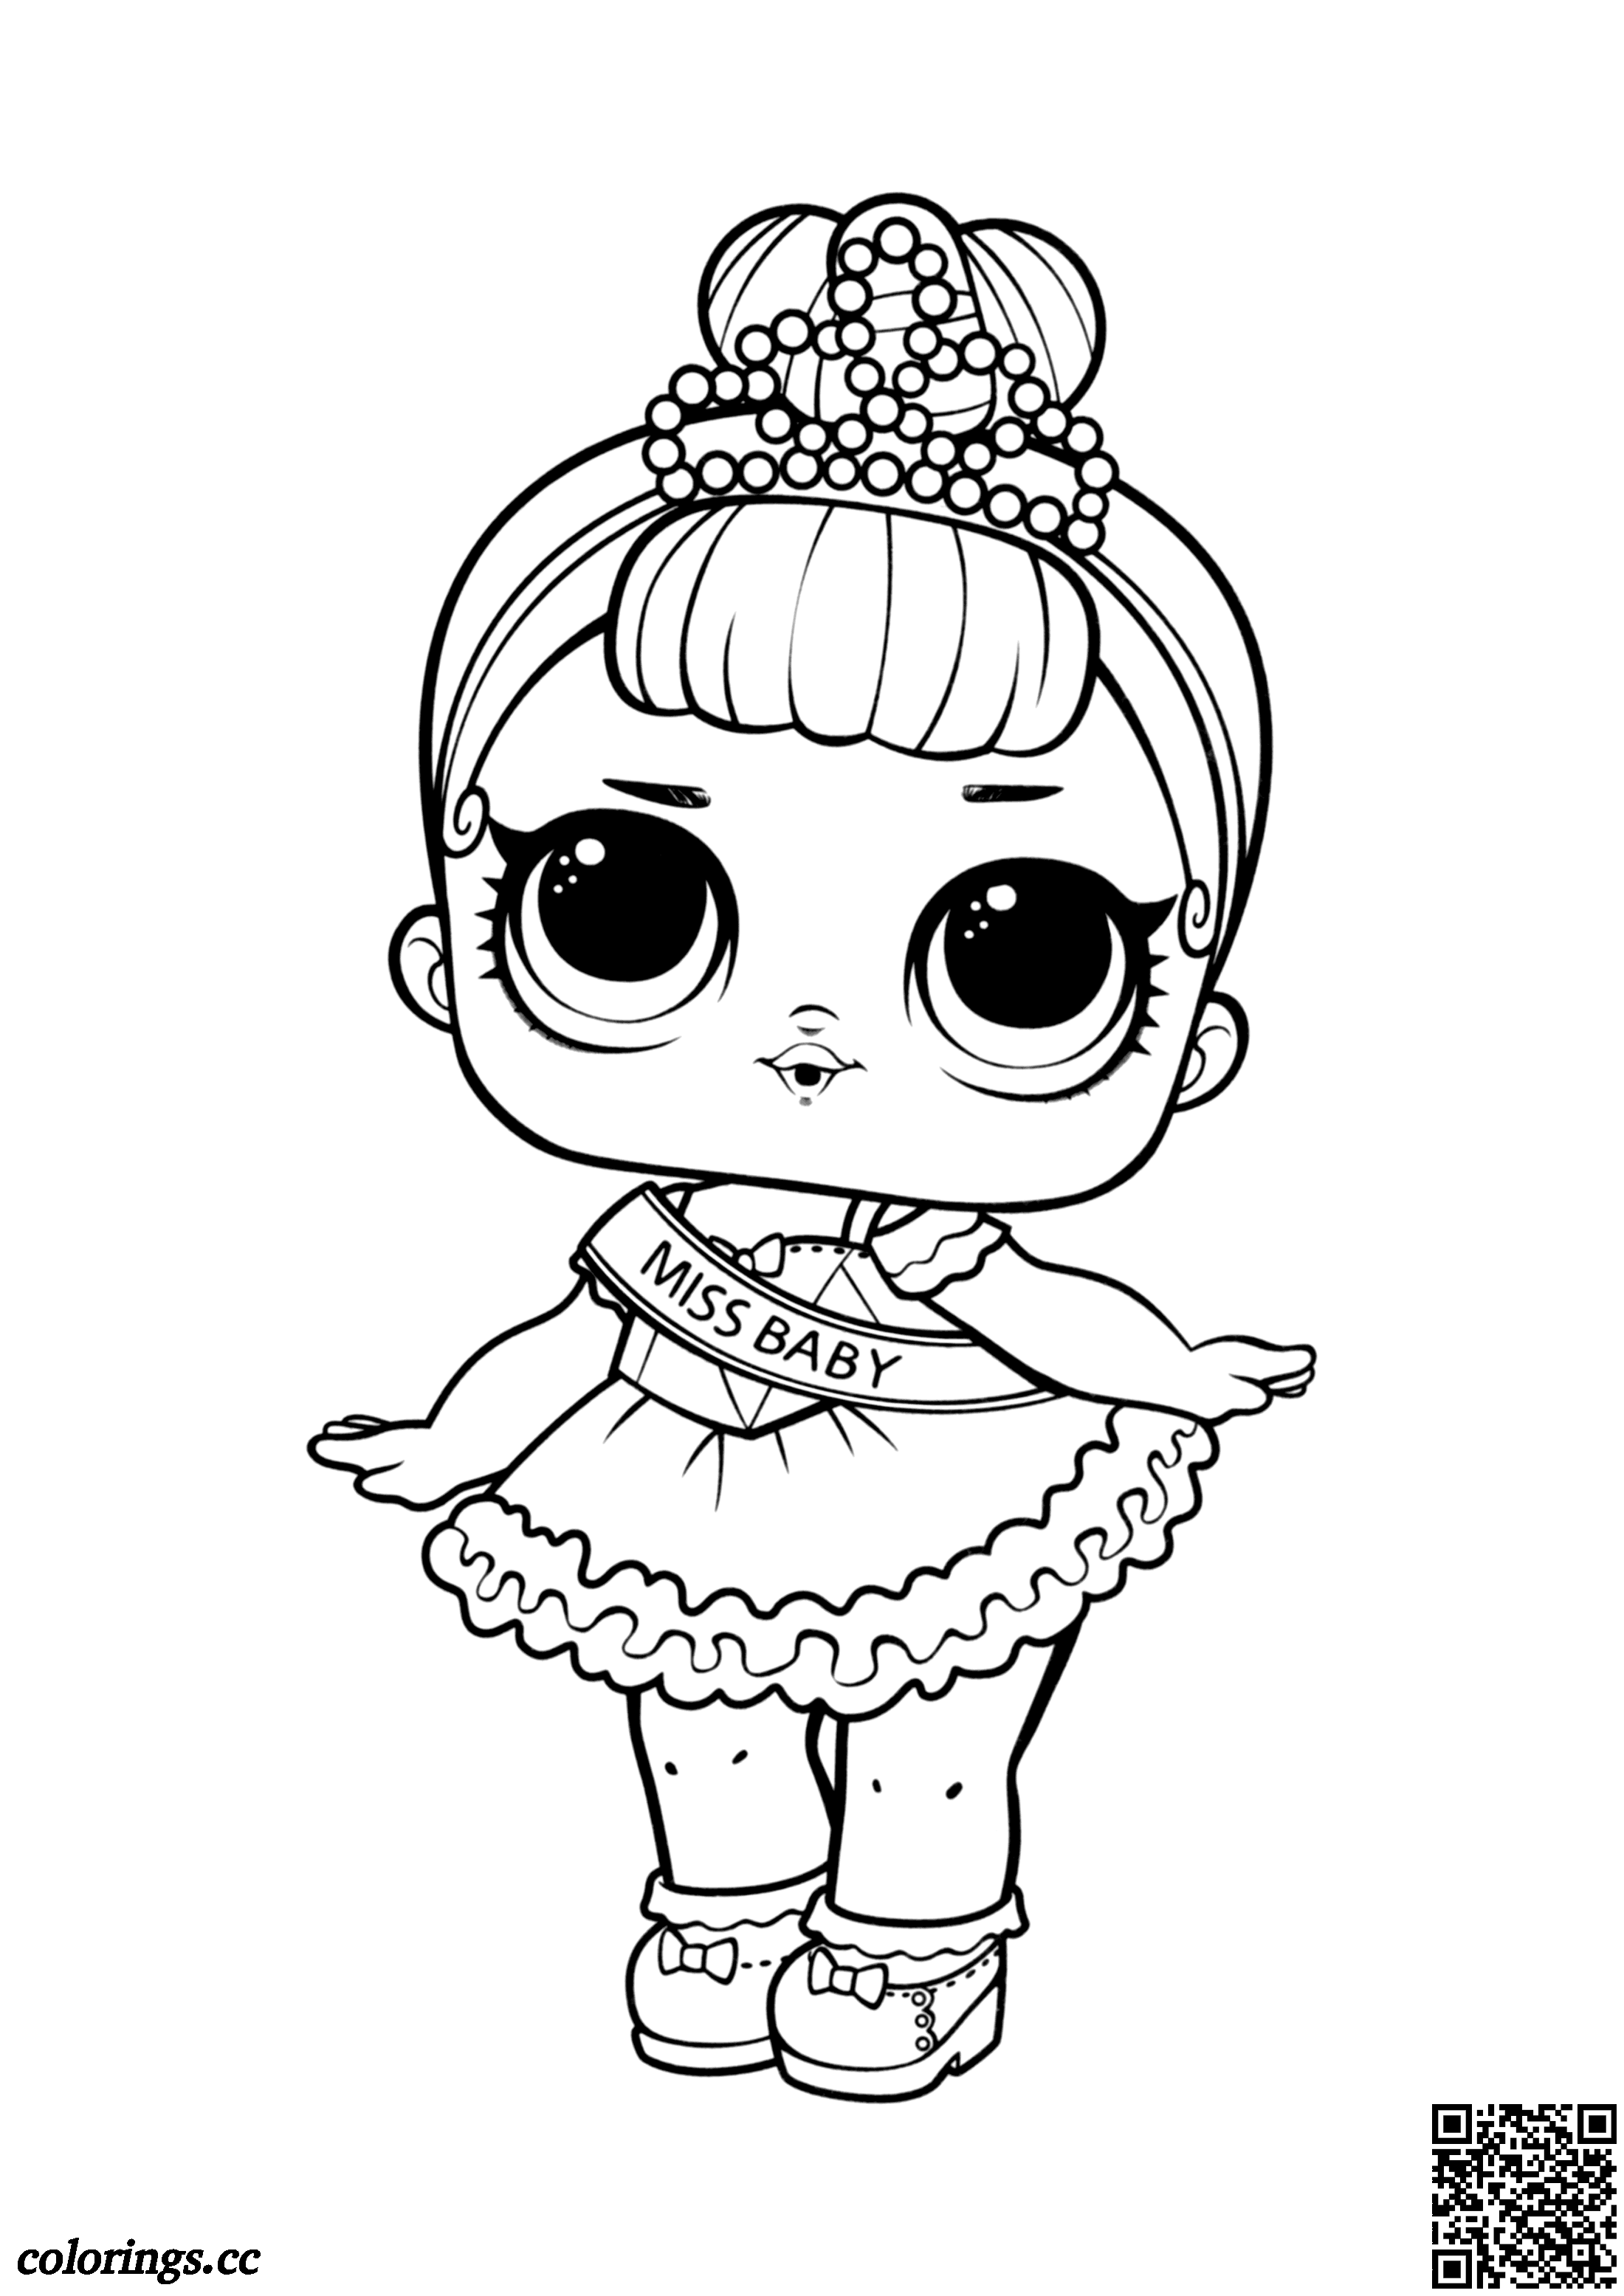 Coloring for girls L.O.L. Surprise   Miss Baby coloring pages ...